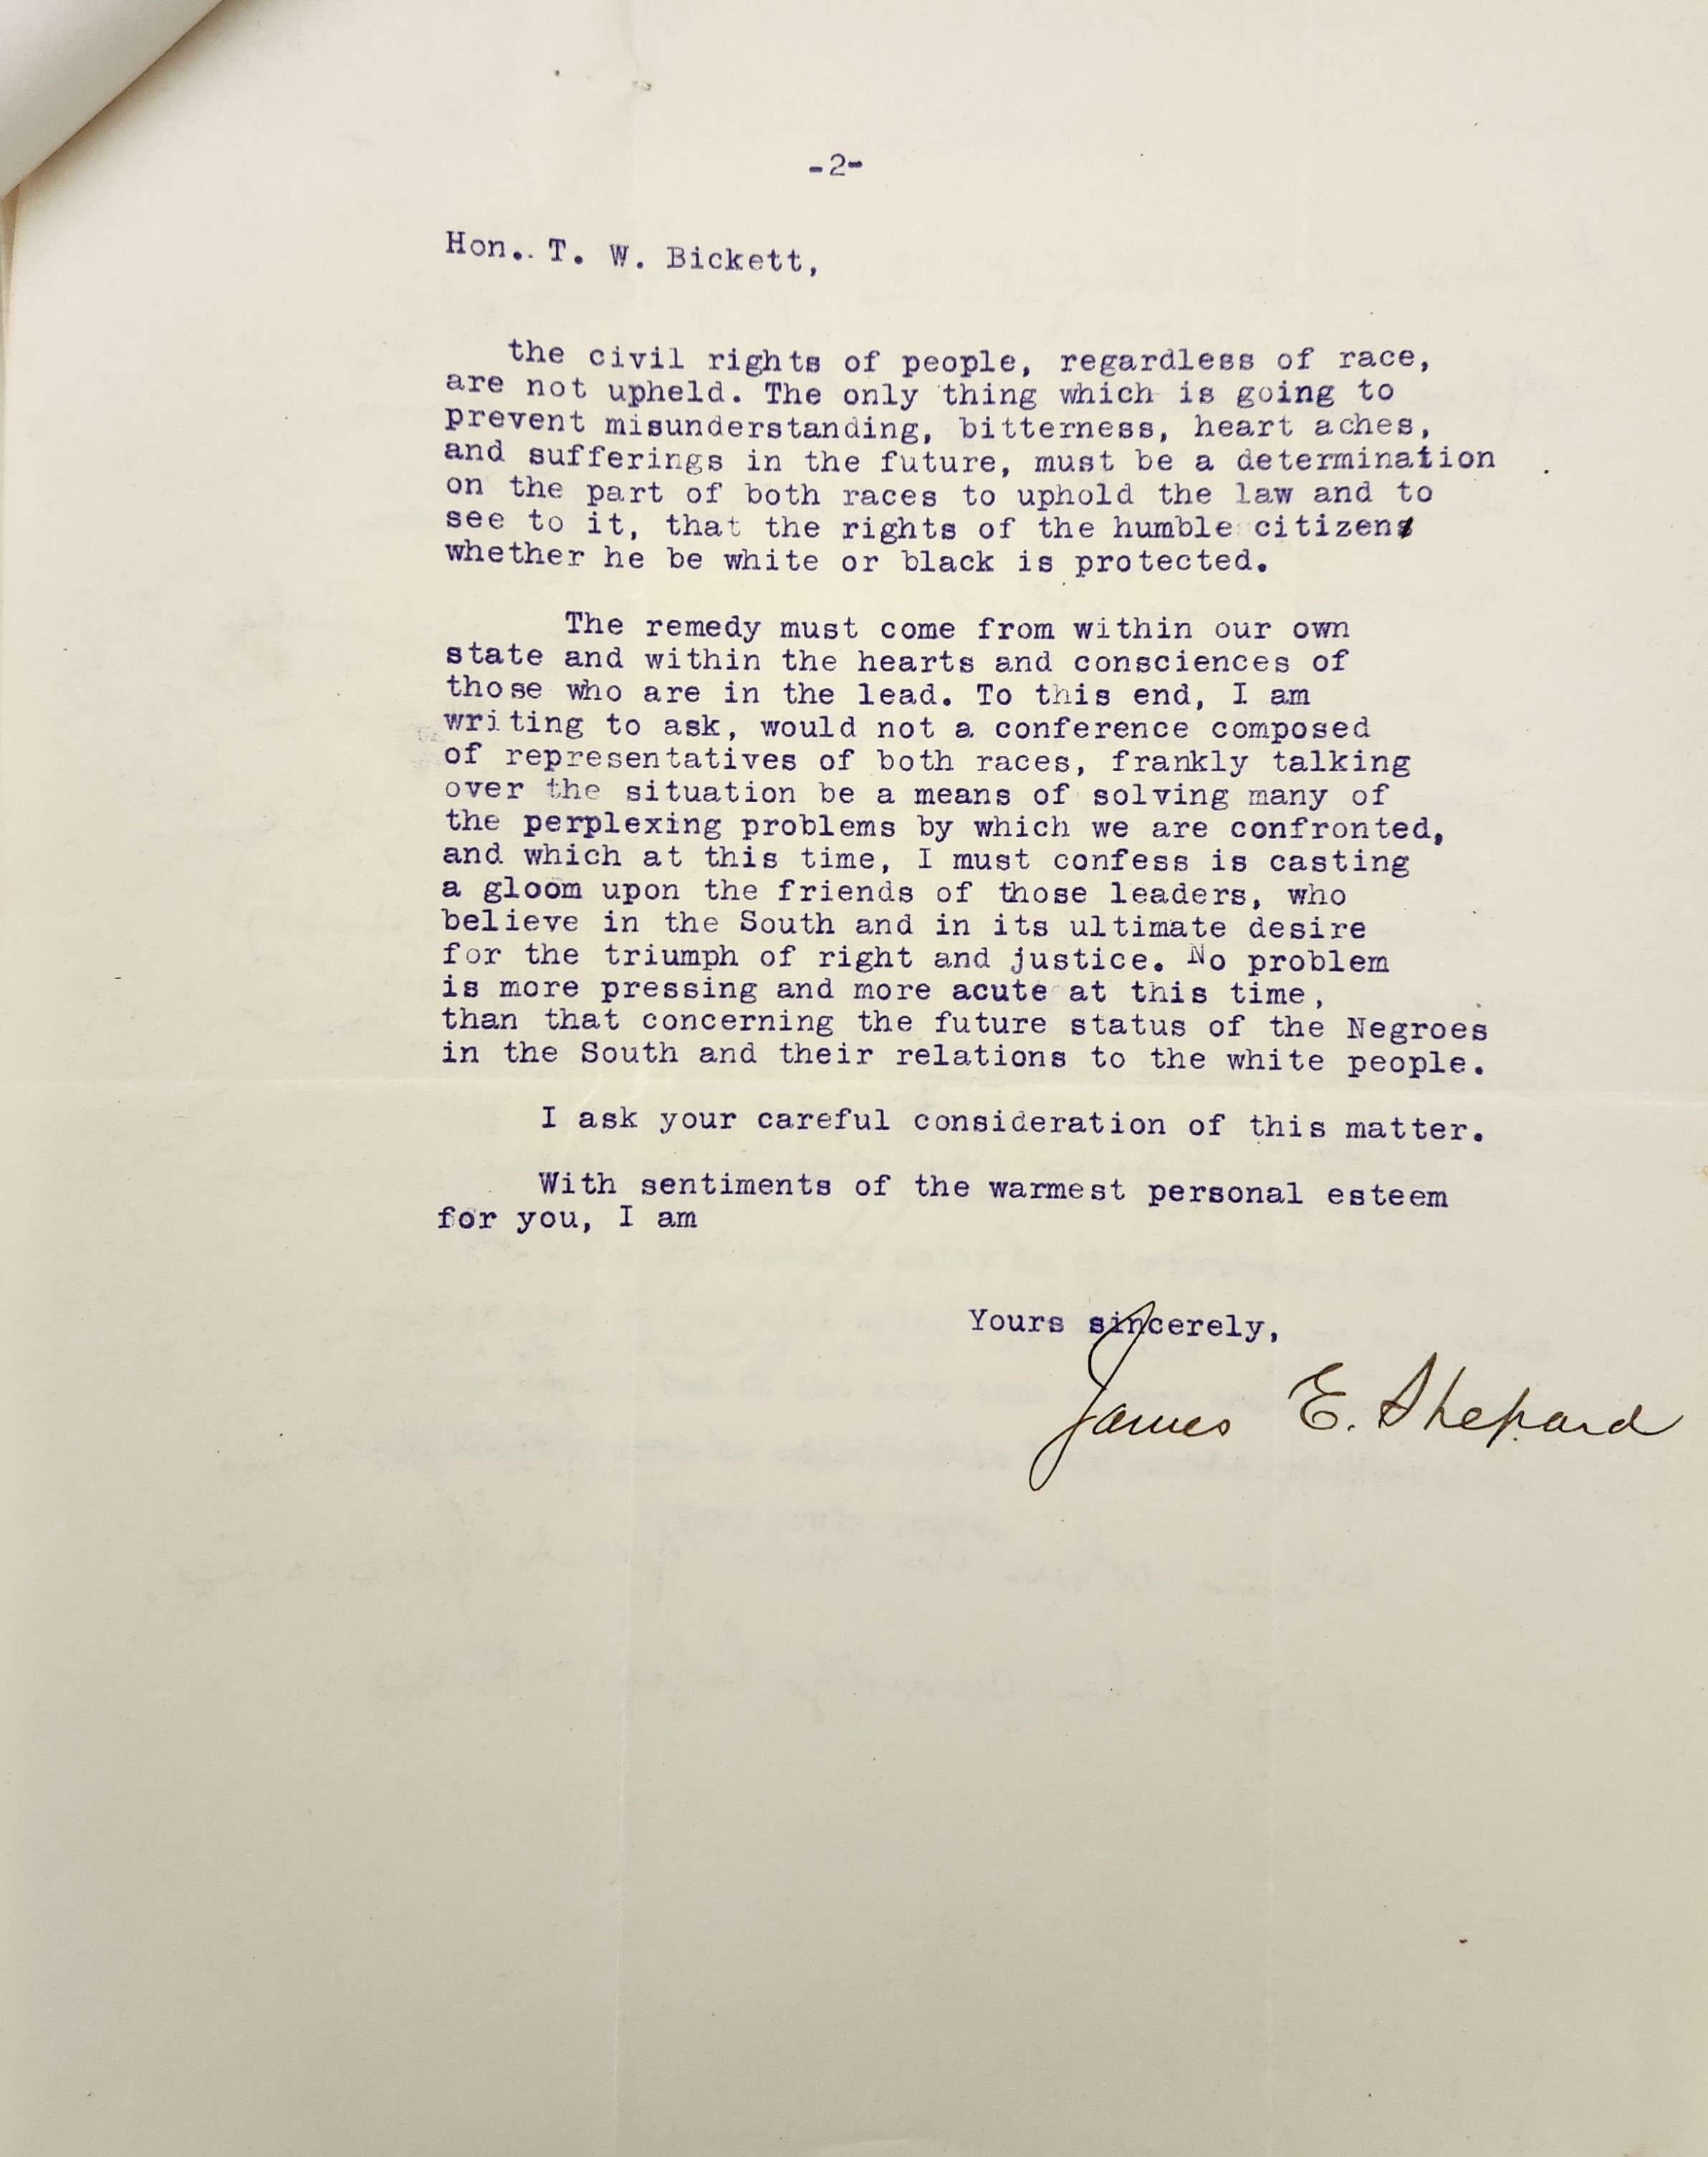 Letter from Shepard to Bickett, November 18, 1918, page 2